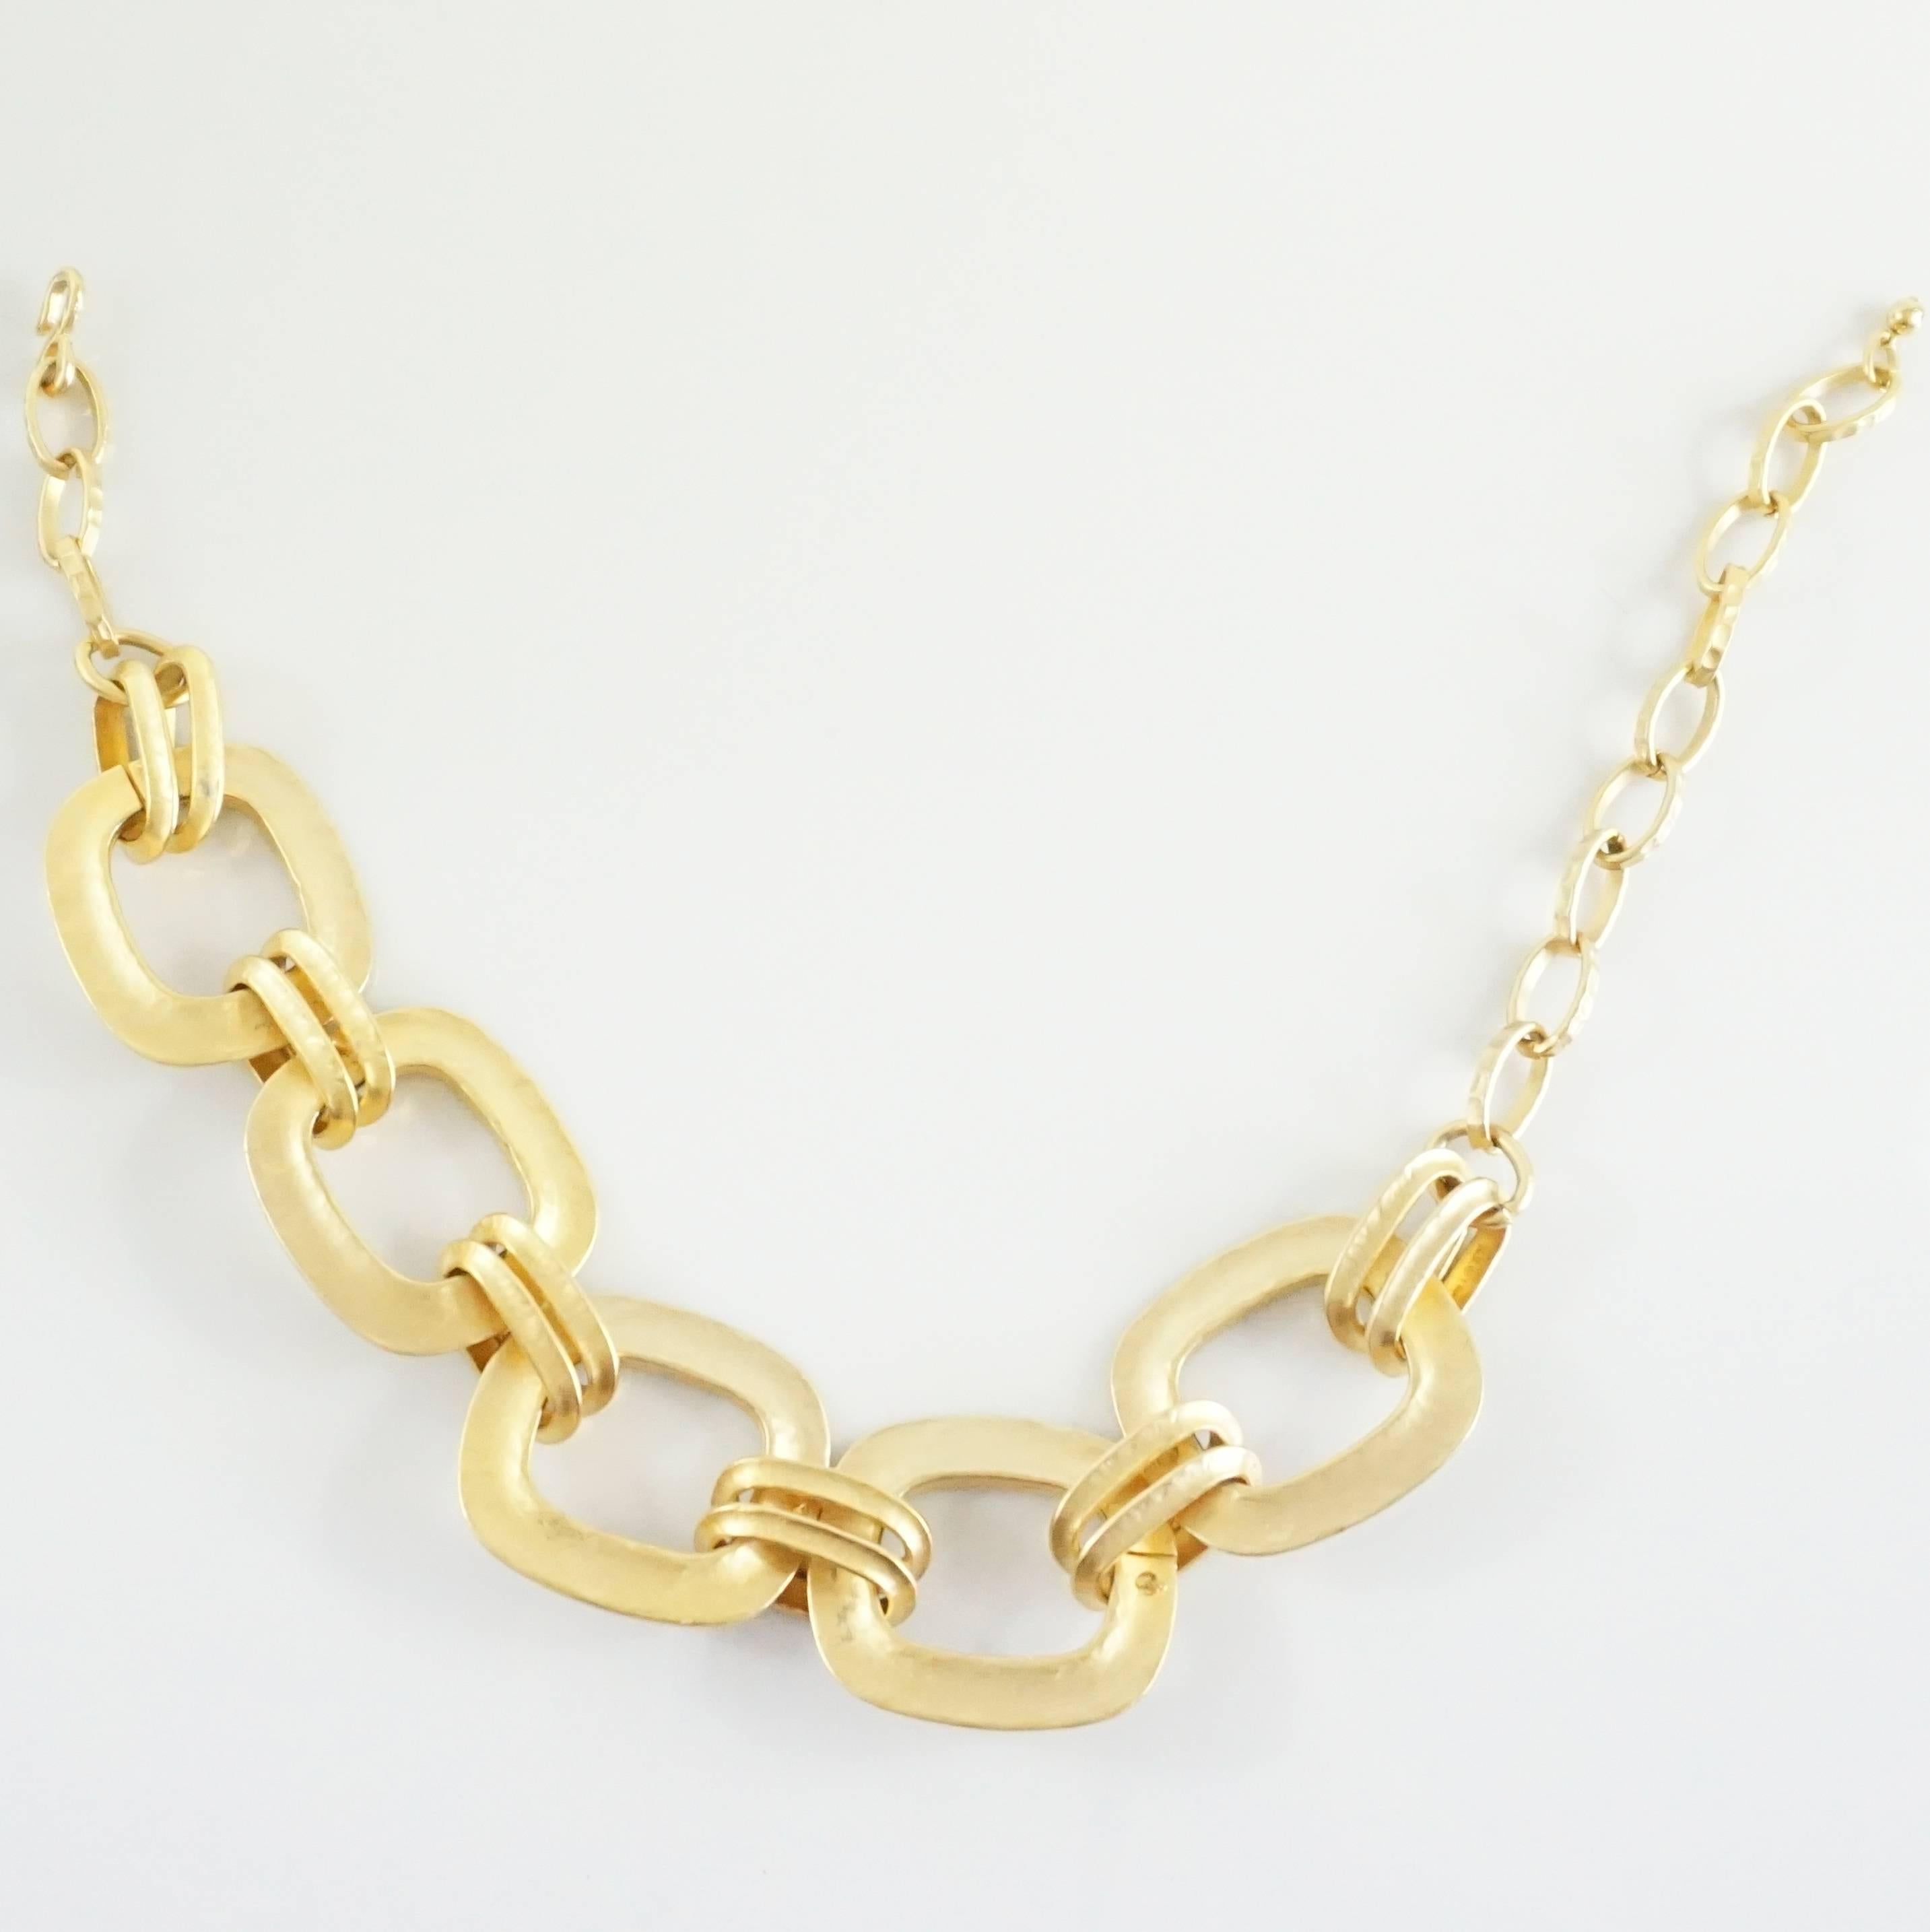 This KJL hammered gold necklace has large links in the front interlocking into smaller links towards the back. The clasp is a hook style with different options for length. The necklace is in excellent condition with minimal wear to the gold as seen